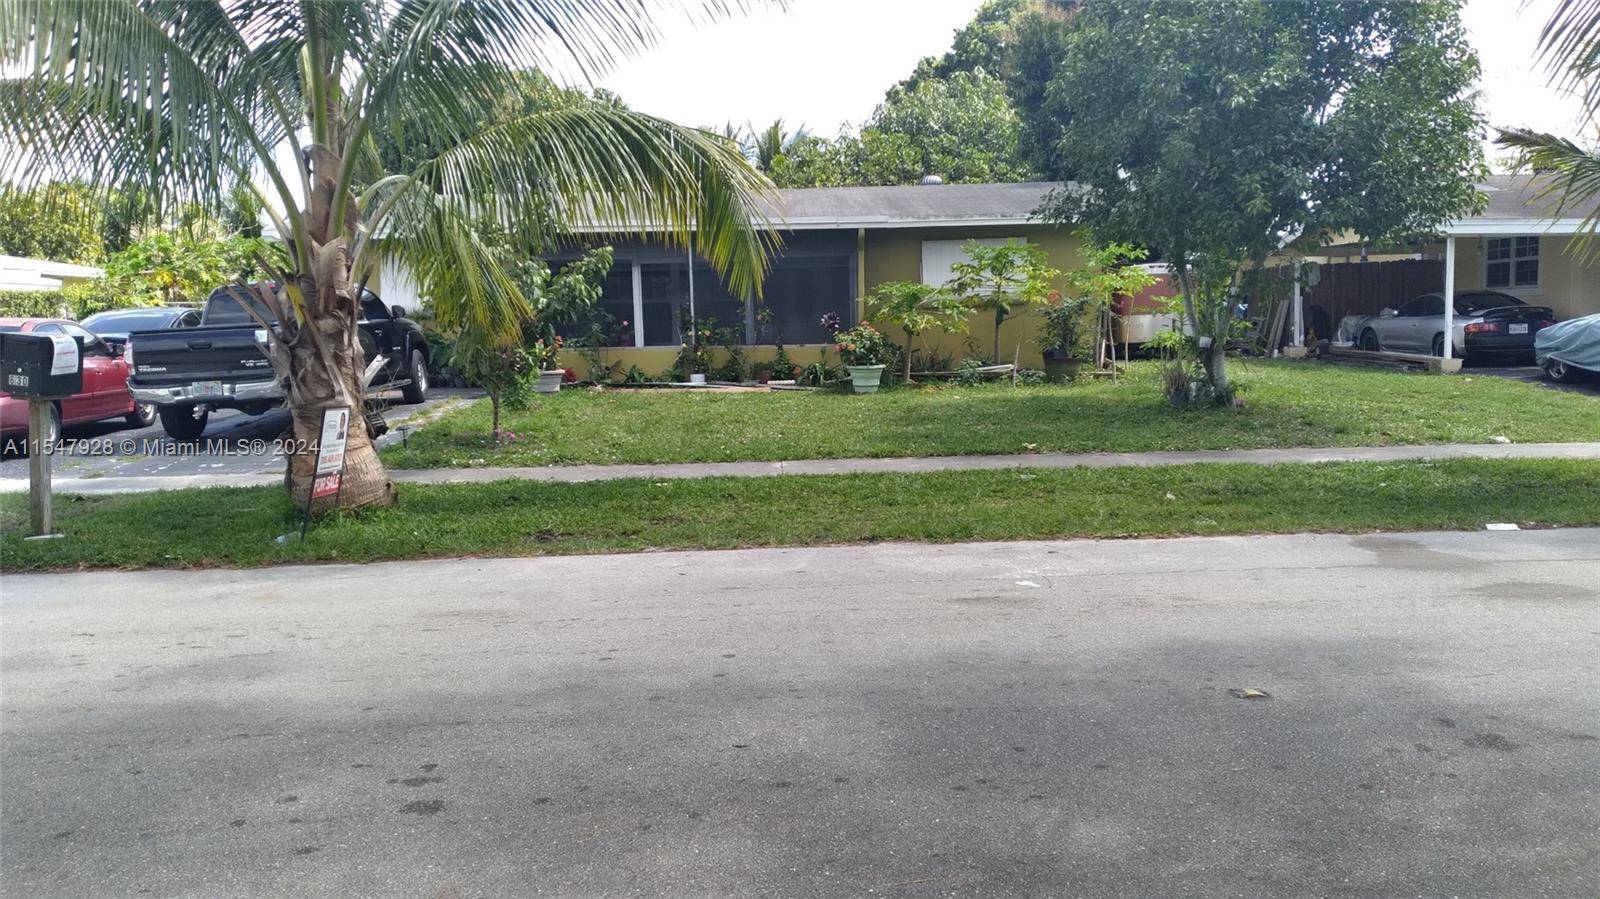 Lovely and spacious single family home in a nice quiet neighborhood, 3 bedrooms and 2 baths.